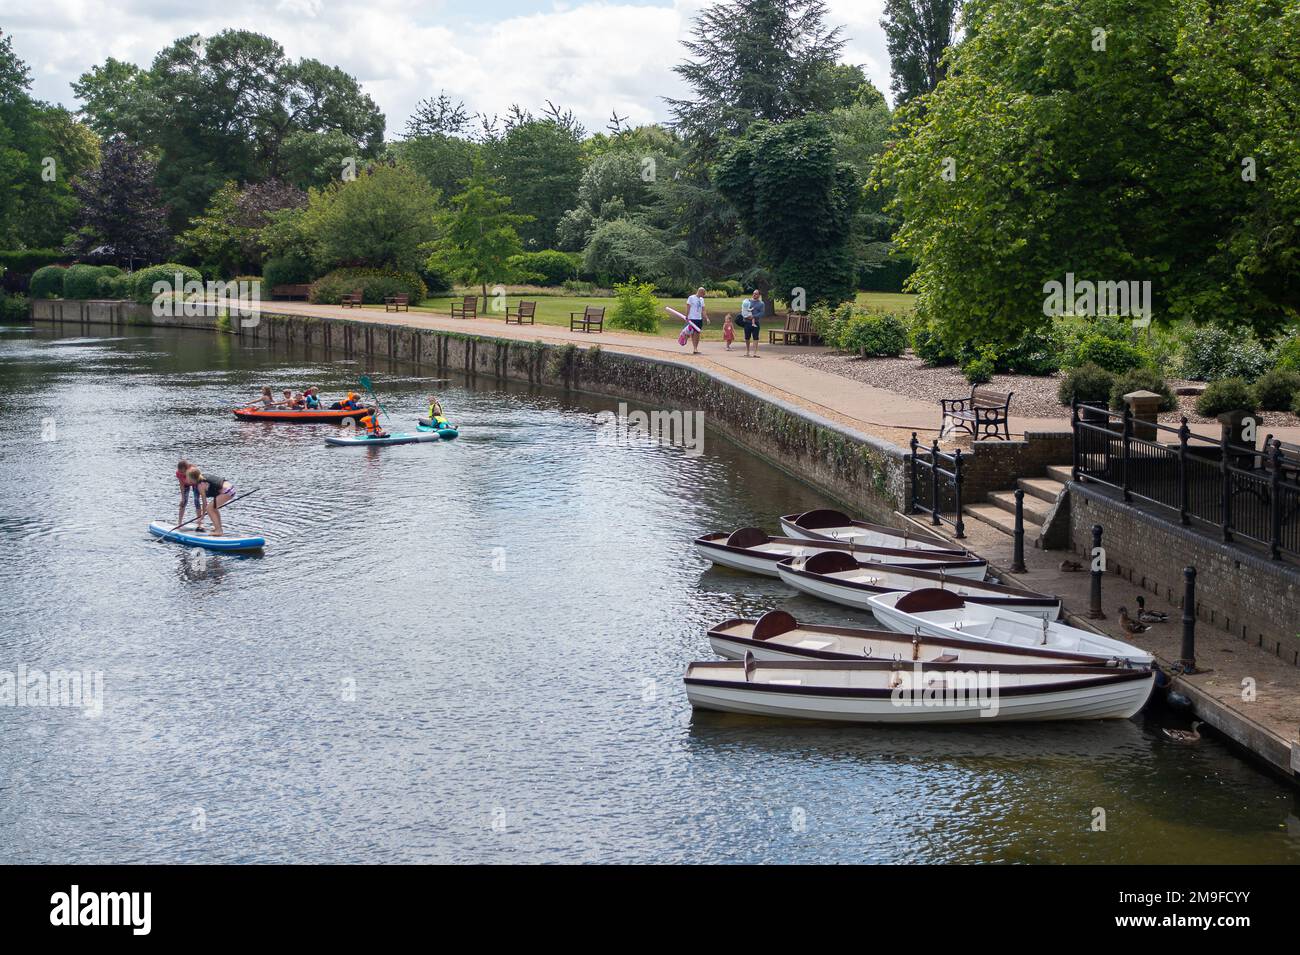 Cookham, Berkshire, UK. 26th June, 2022. People out paddle boarding on the River Thames next to the John Lewis Odney Club in Cookham. Credit: Maureen McLean/Alamy Stock Photo